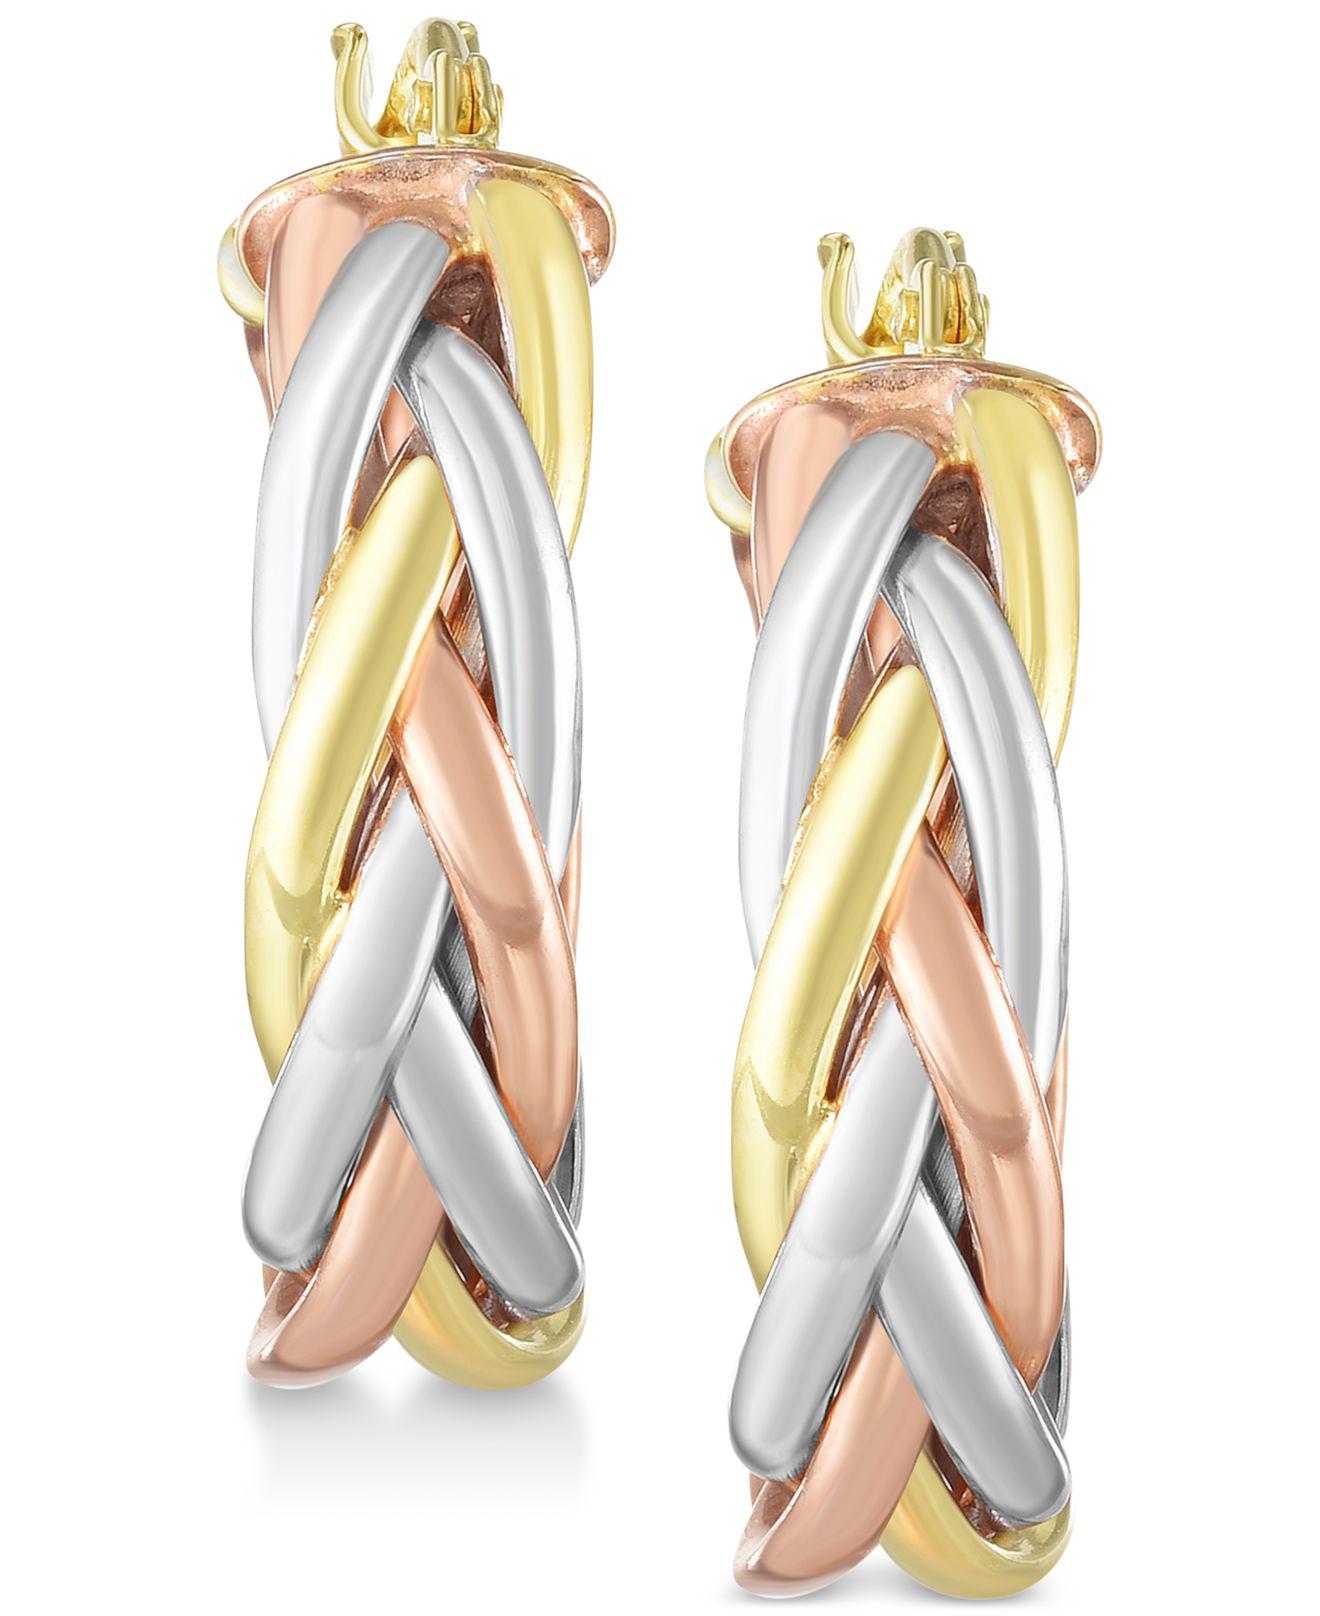 Tricolor Triple Braided Round Hoop Earrings Real 14K Yellow White Rose Gold